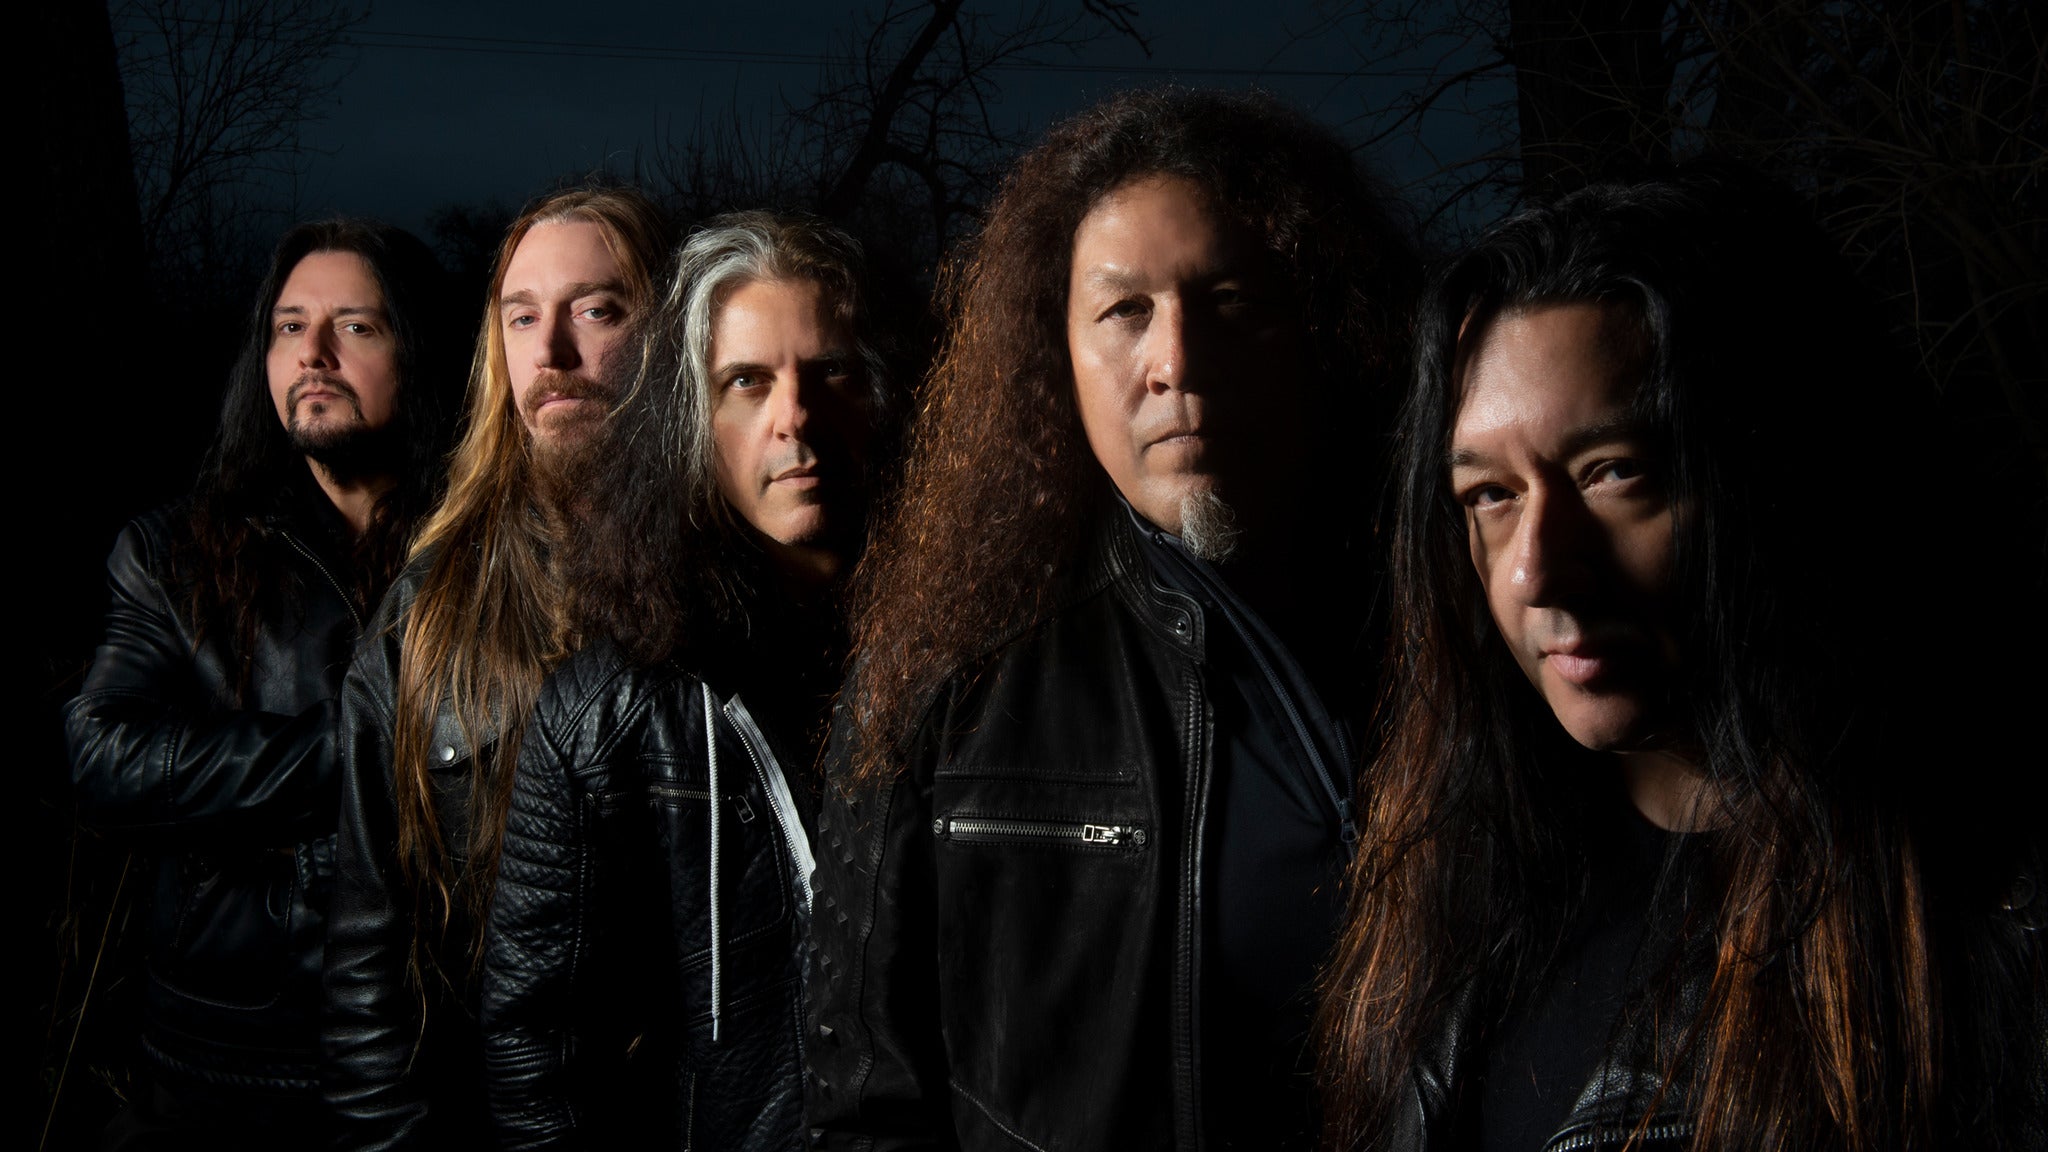 The Bay Strikes Back Tour: Testament, Exodus, and Death Angel